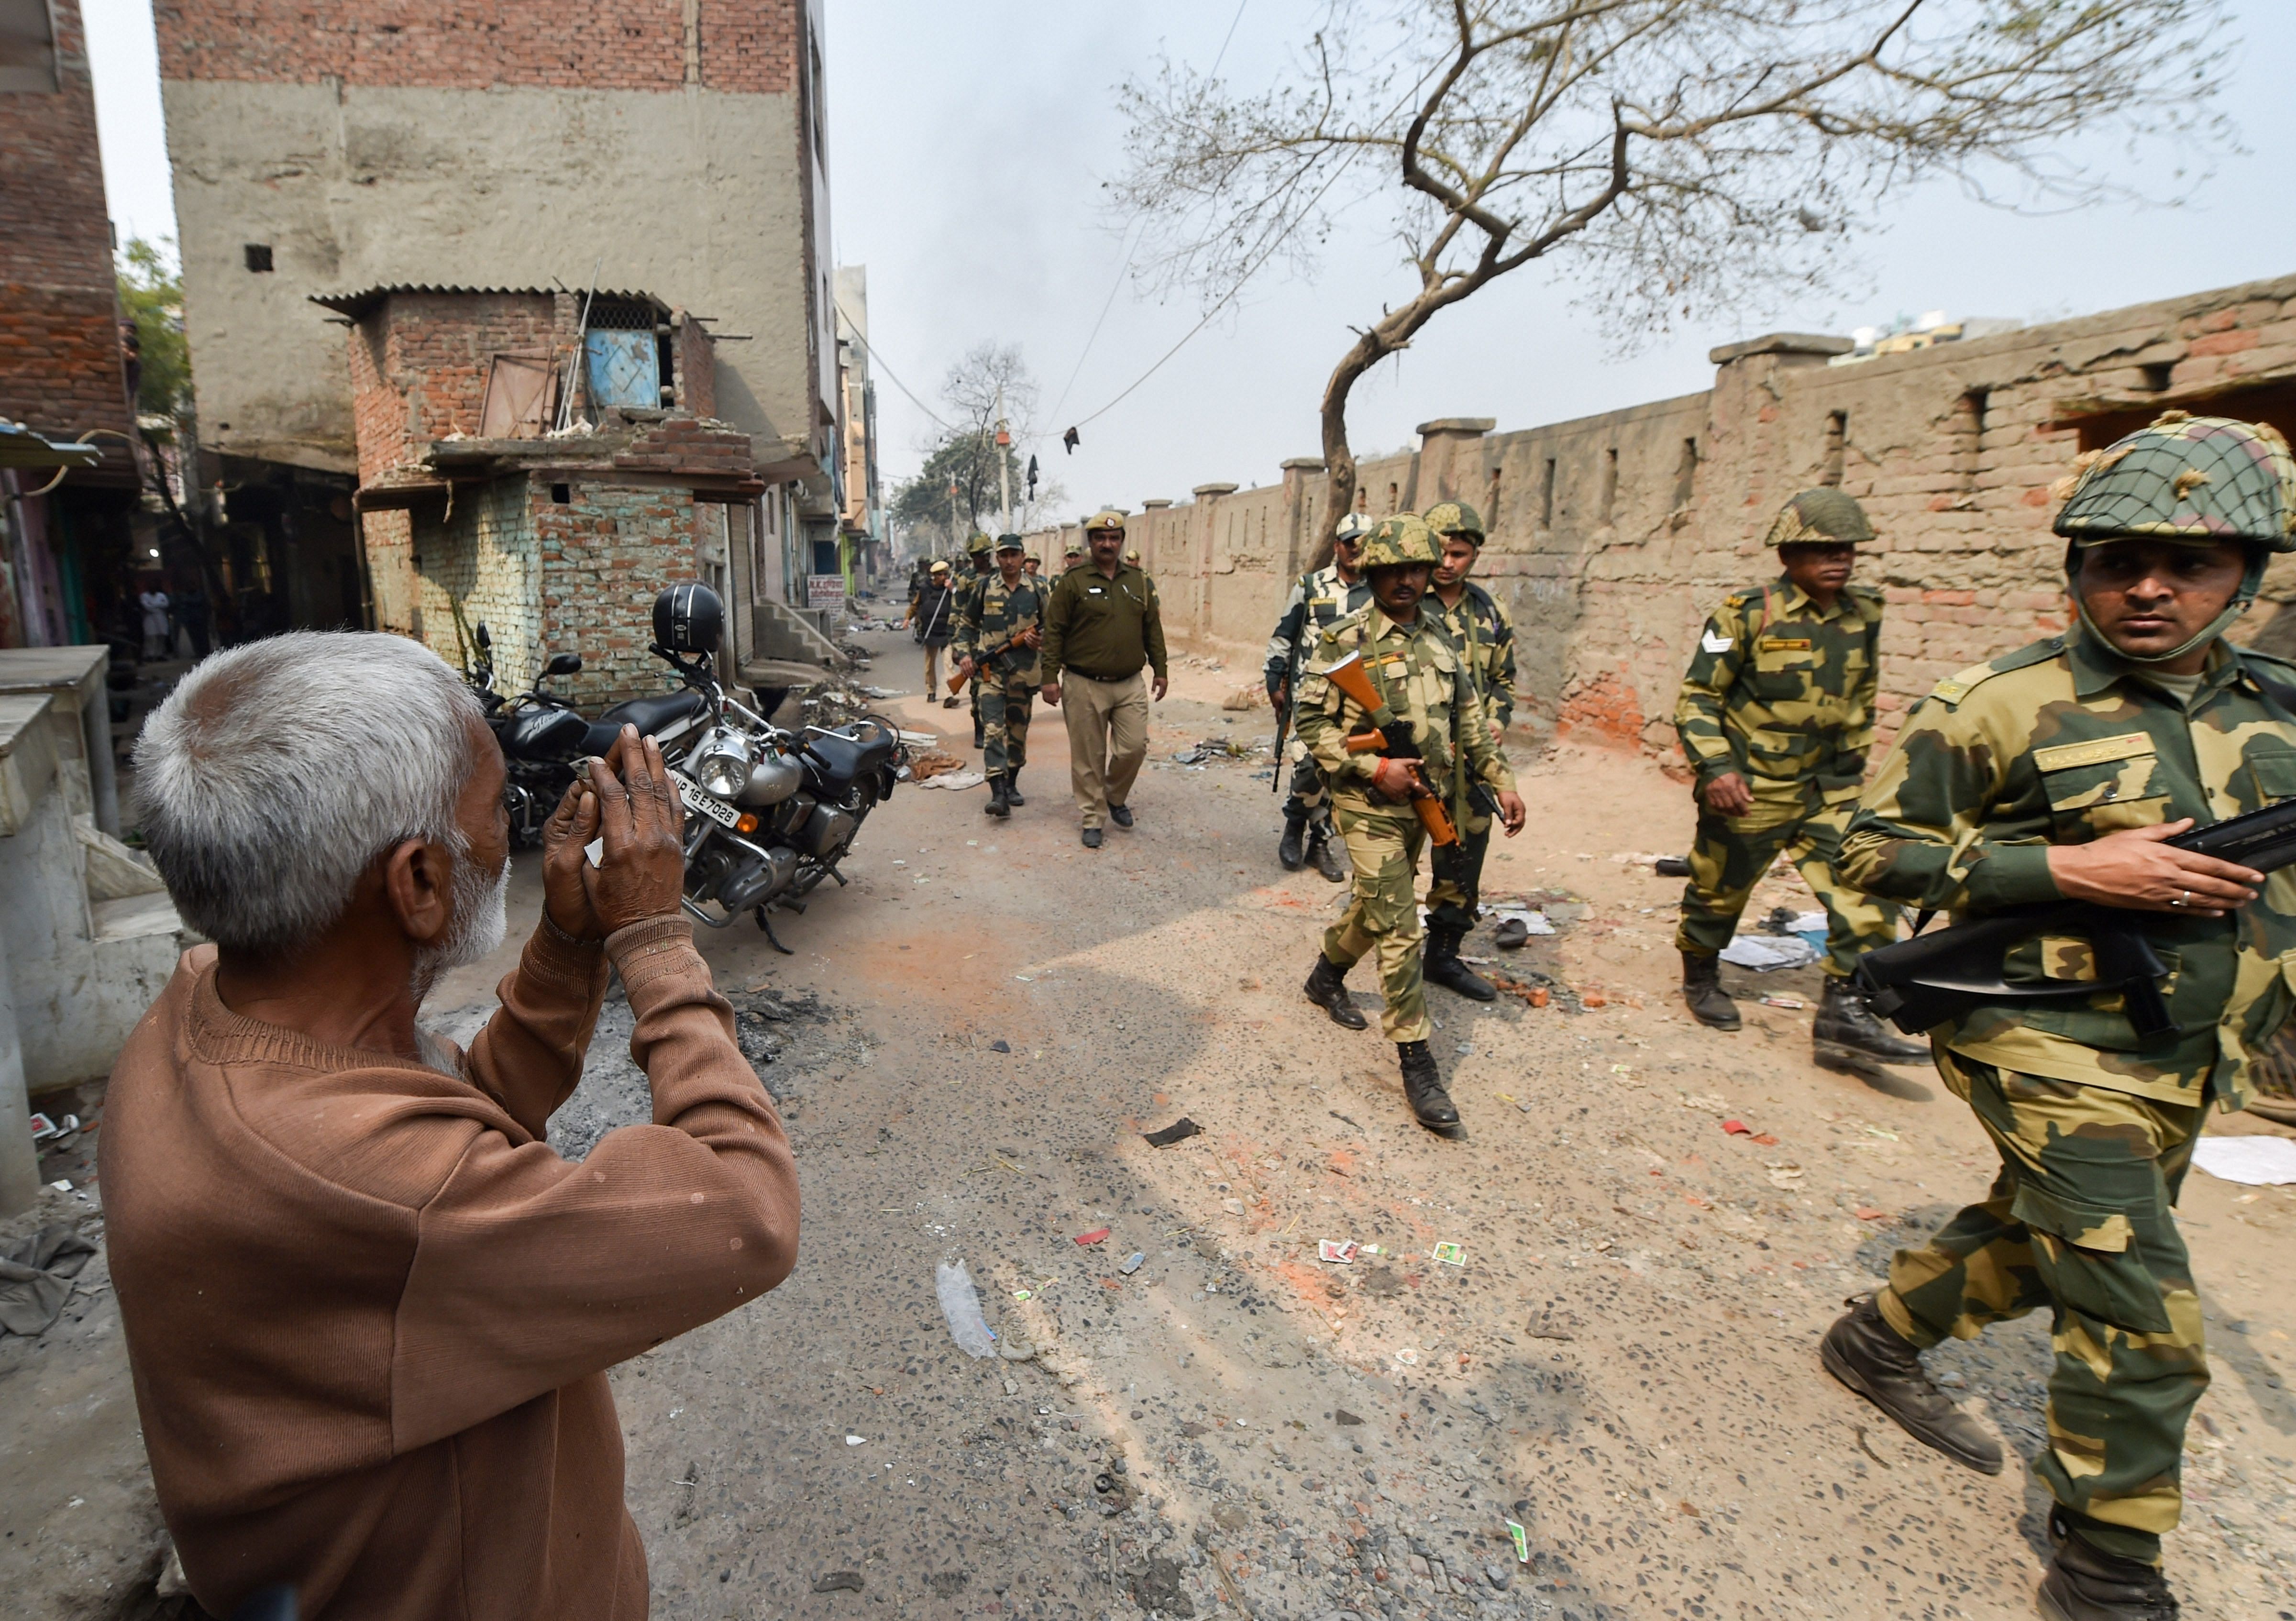 At least 25 people have lost their lives in the communal violence over the amended citizenship law as police struggled to check the rioters who ran amok on streets, burning and looting shops, pelting stones and thrashing people. (PTI Photo)